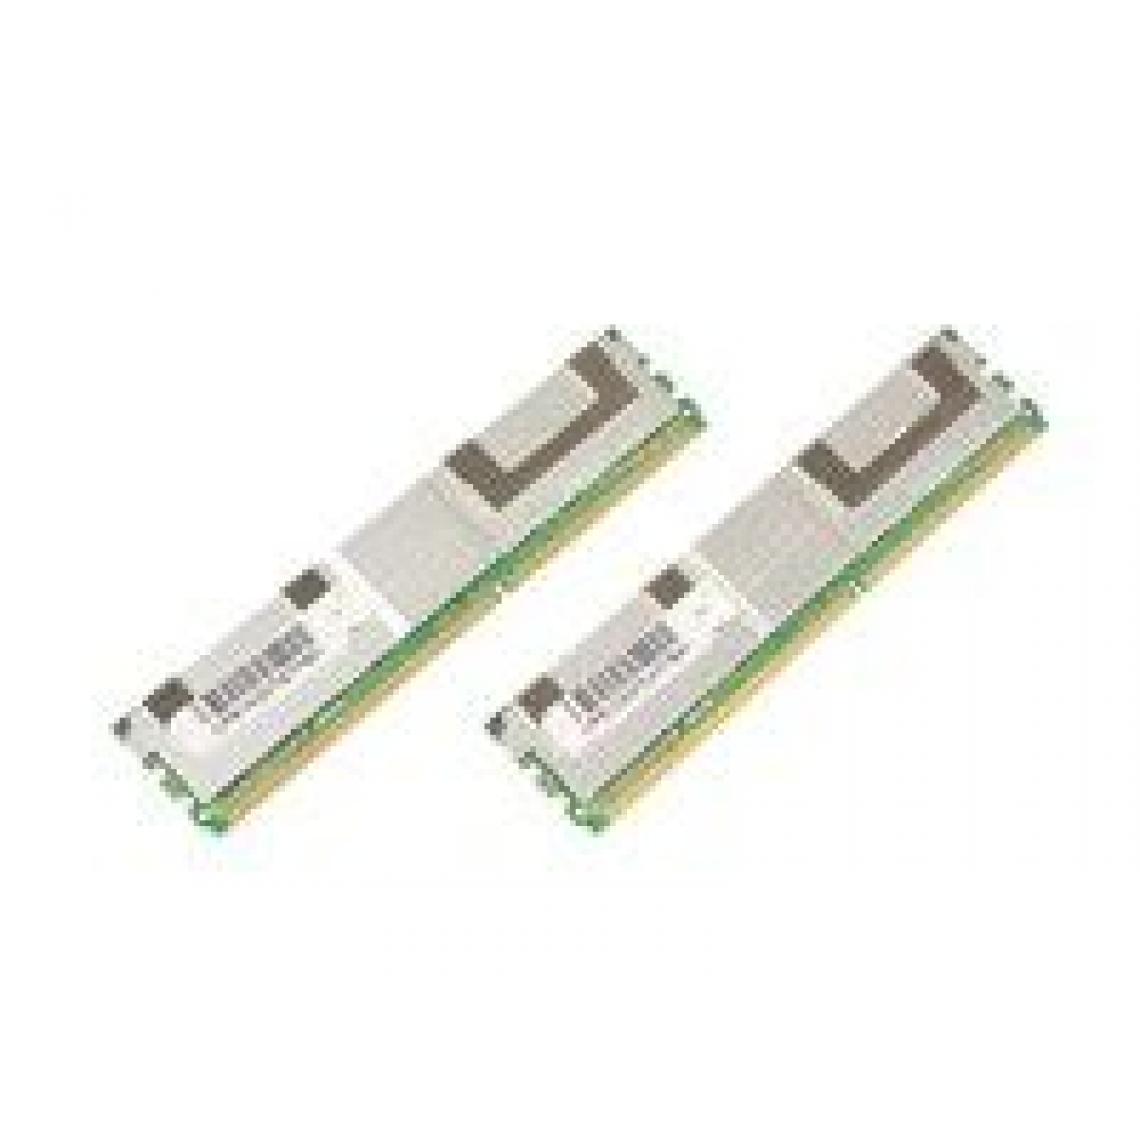 Because Music - 8 GB DDR2 667MHZ DIMM Kit of 2 x 4GB Modules Fully-Buffered Rank 4 - RAM PC Fixe